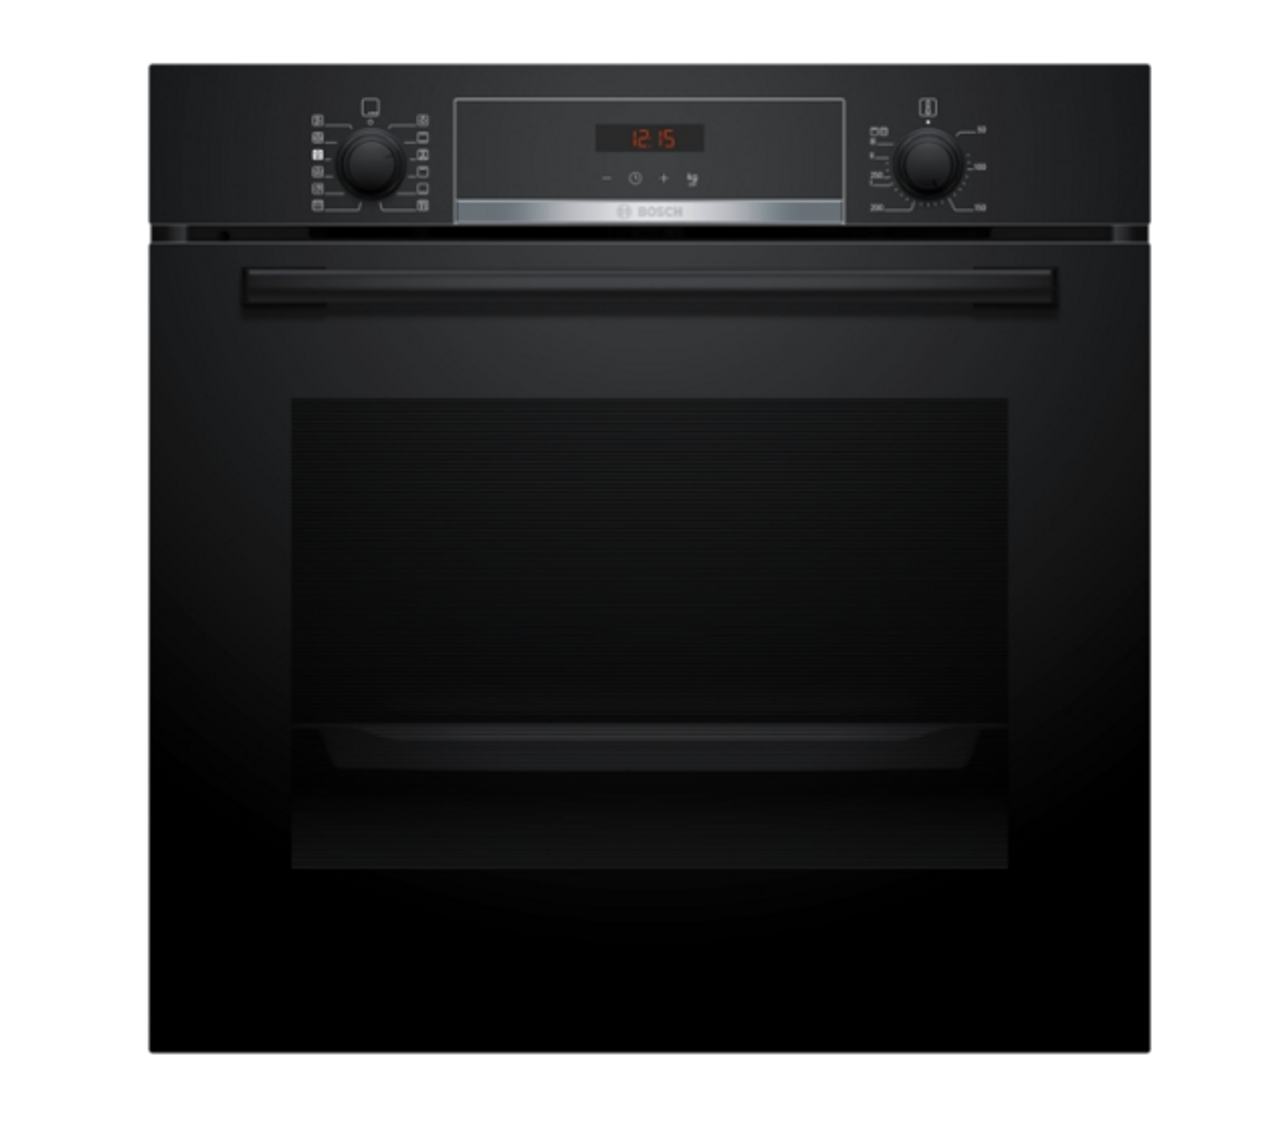 HRA574EB0A - Serie 4 Built-in Oven With Added Steam Function 60 x 60 cm - Black